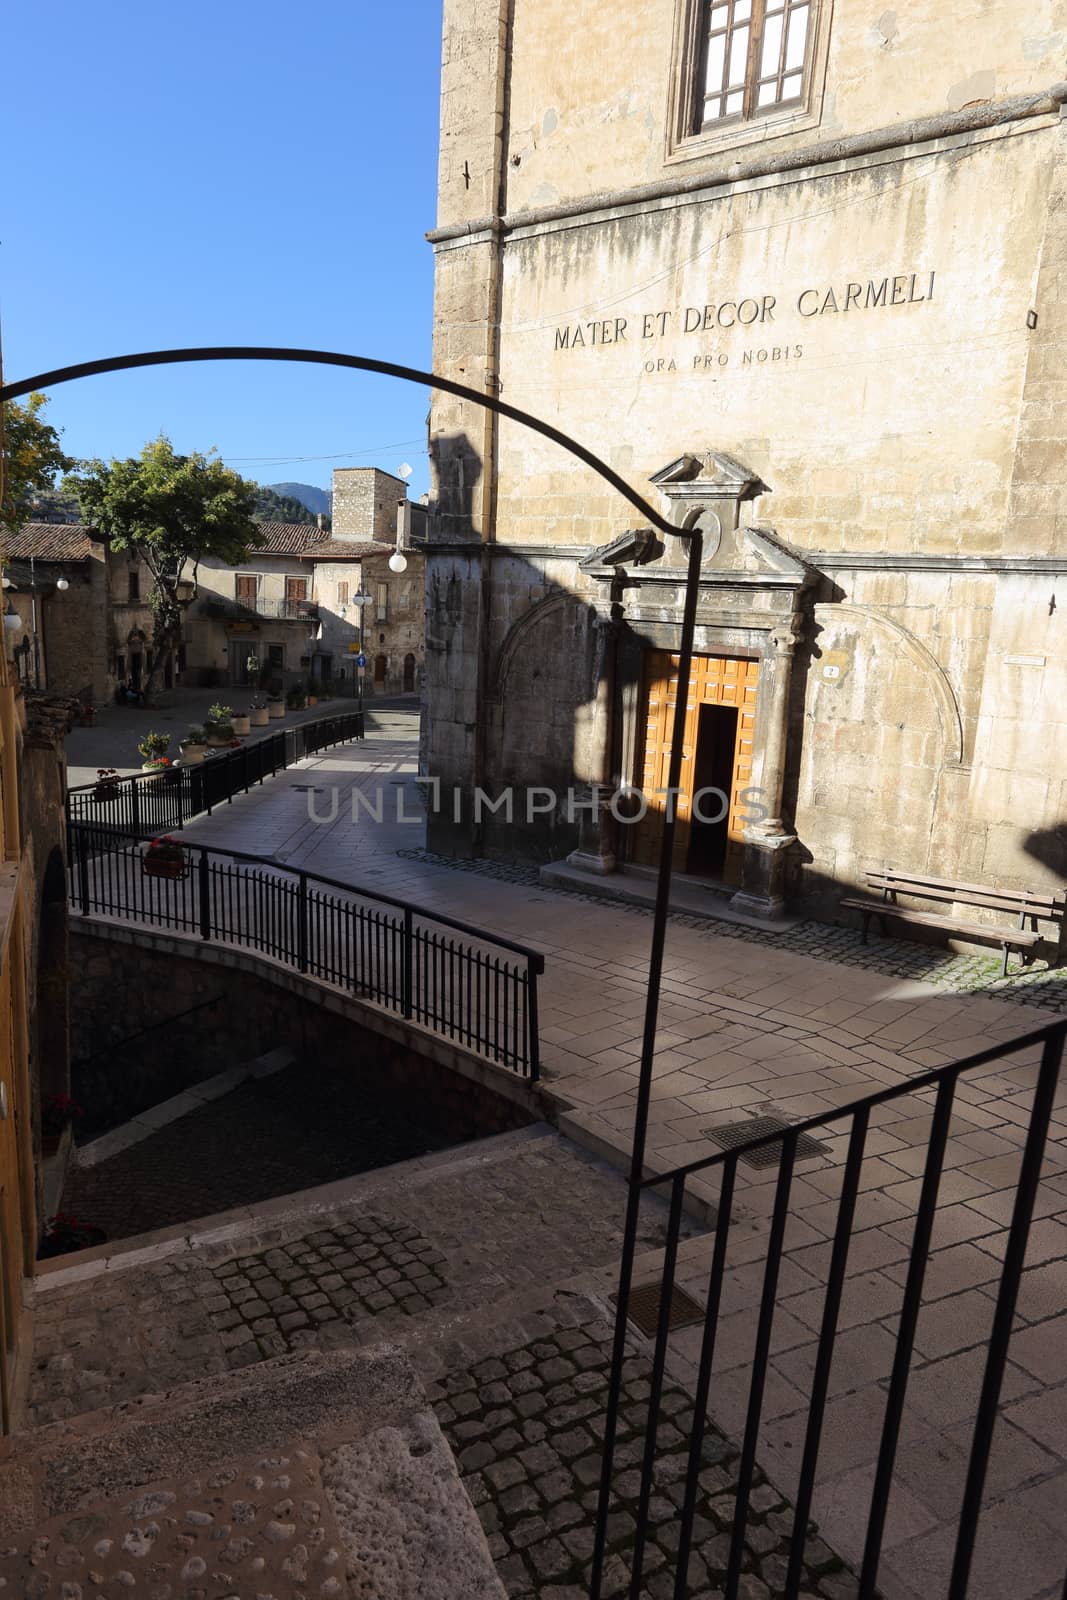 Scanno, Italy - 12 October 2019: The site of the famous photograph by Henri Cartier-Bresson